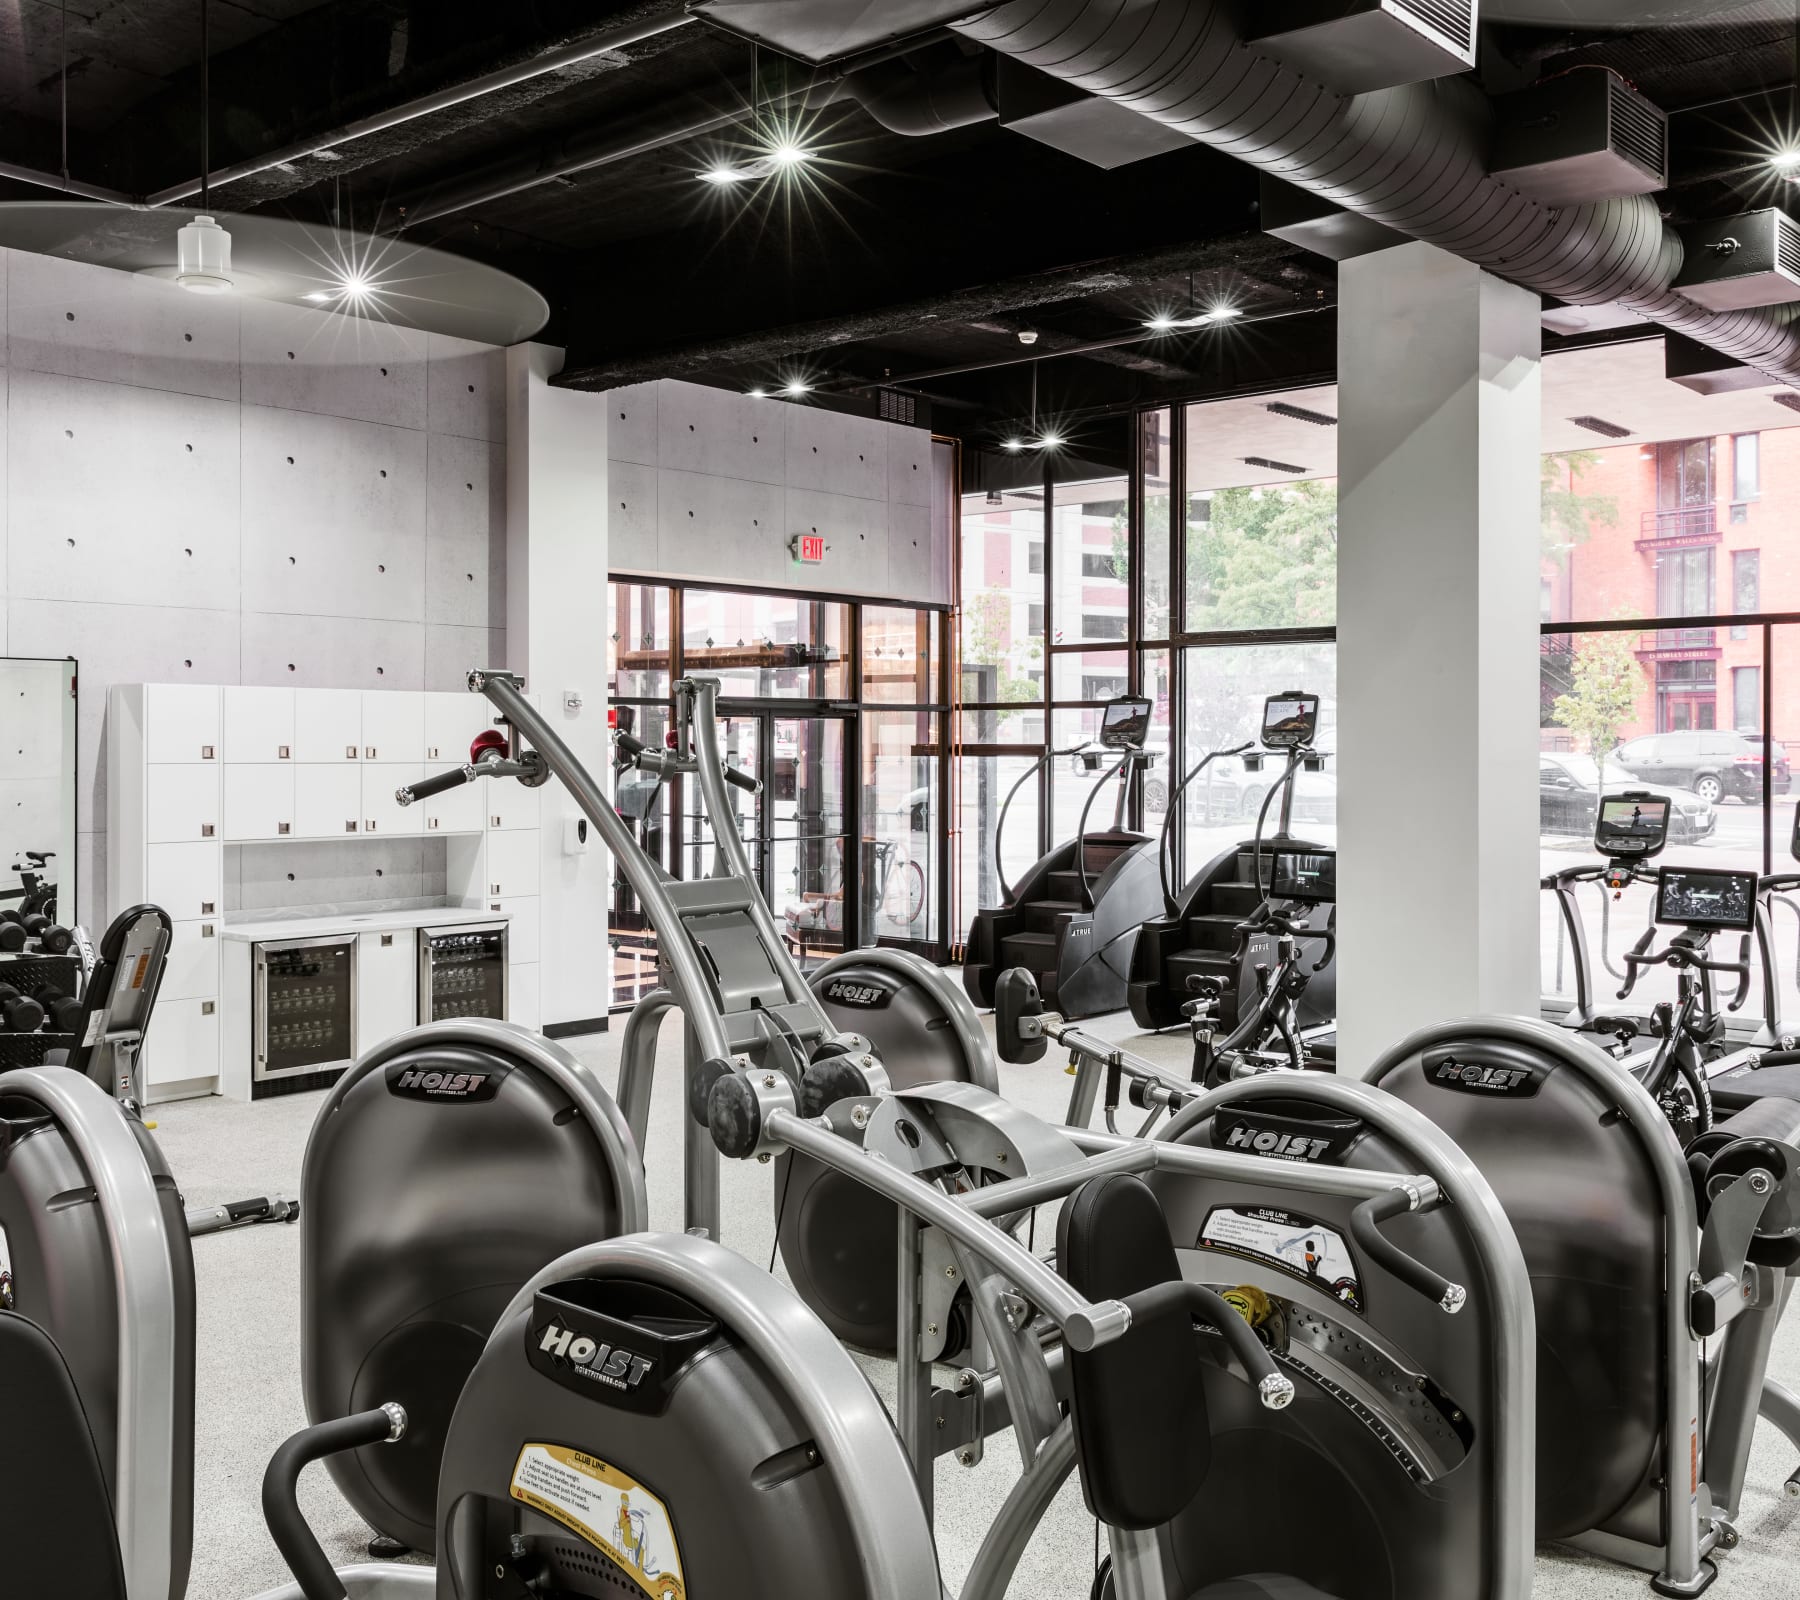 Very well-equipped onsite fitness center at 20 Hawley in Binghamton, New York